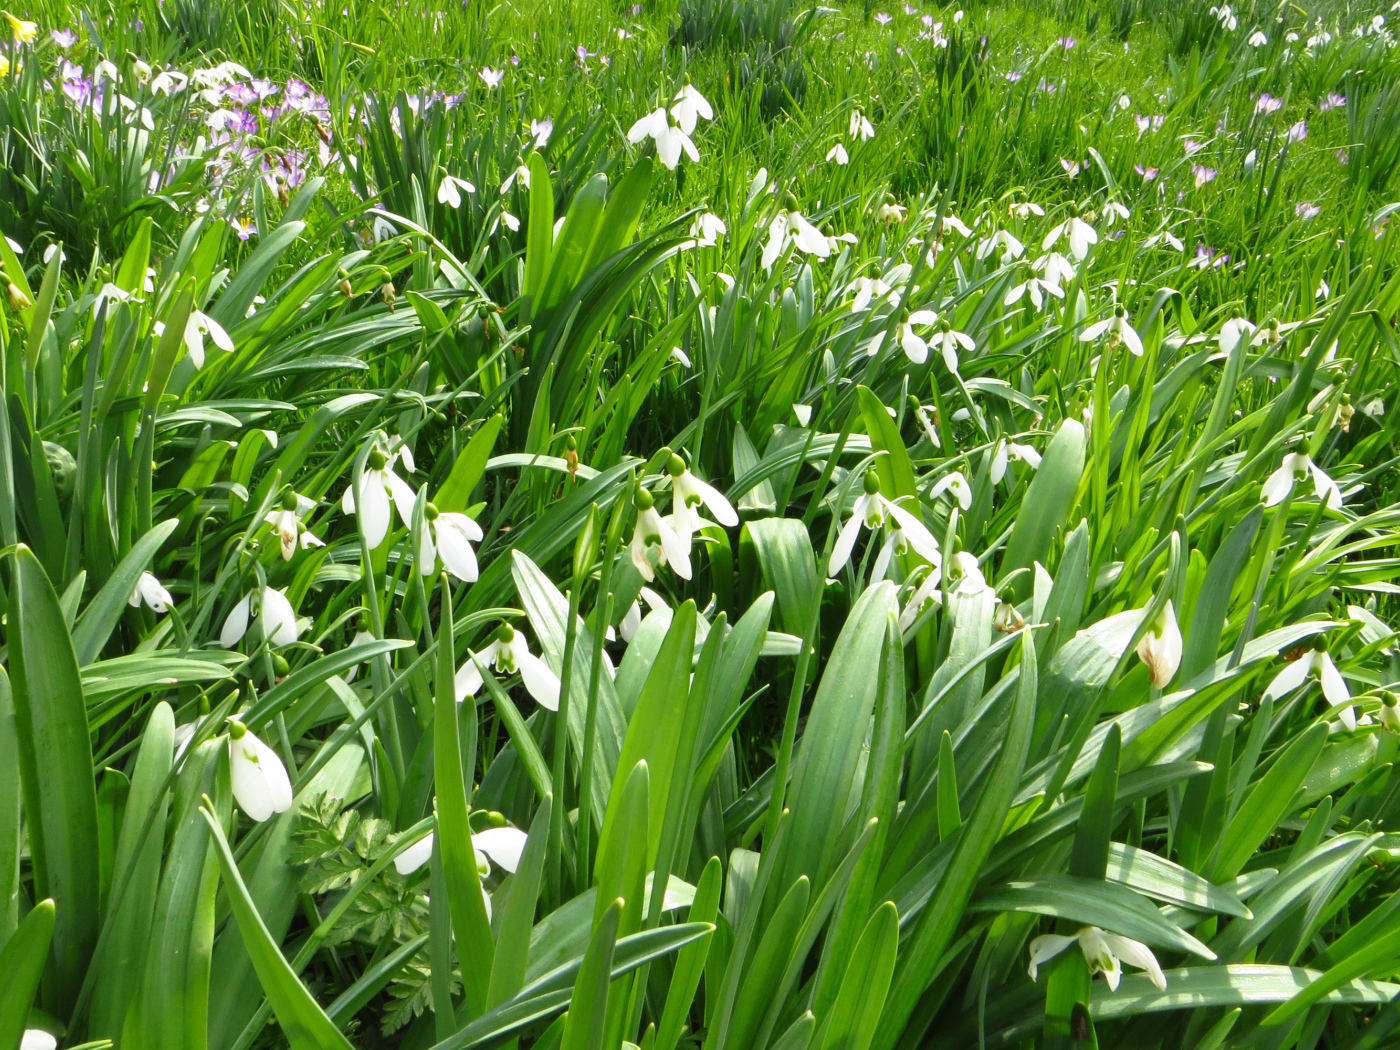 Many white snowdrops with green leaves